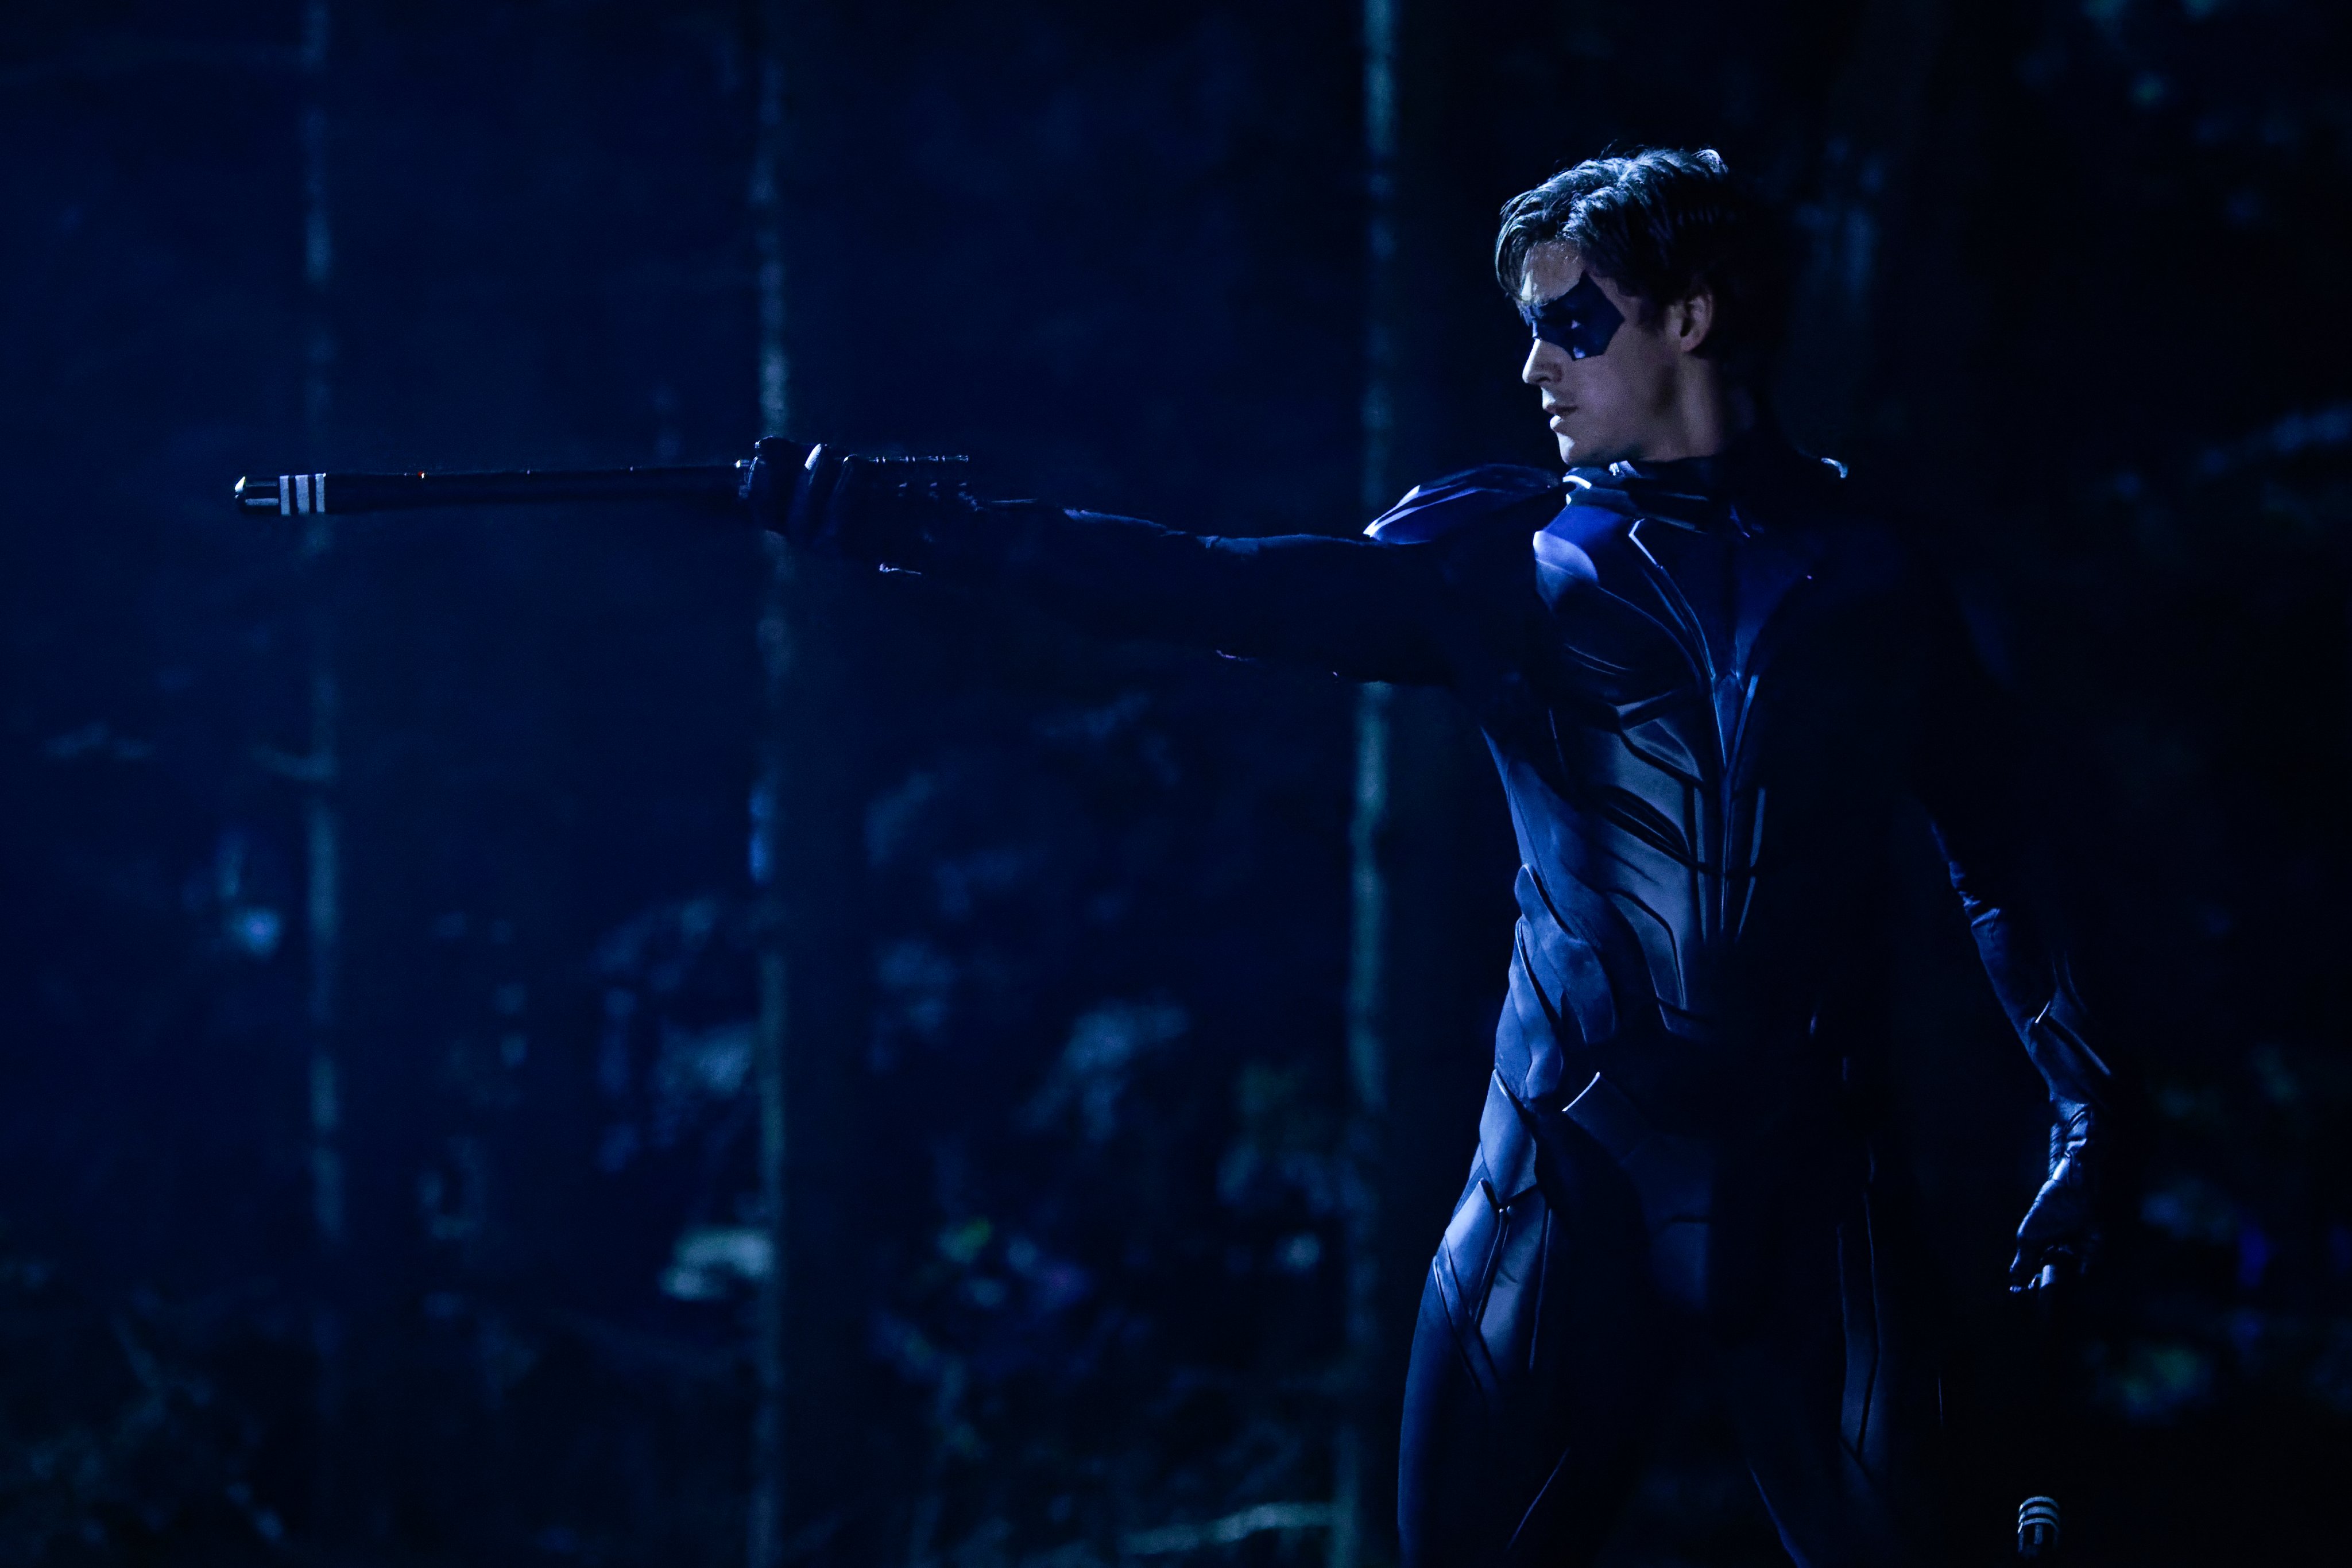 Nightwing Titans 4K Wallpapers